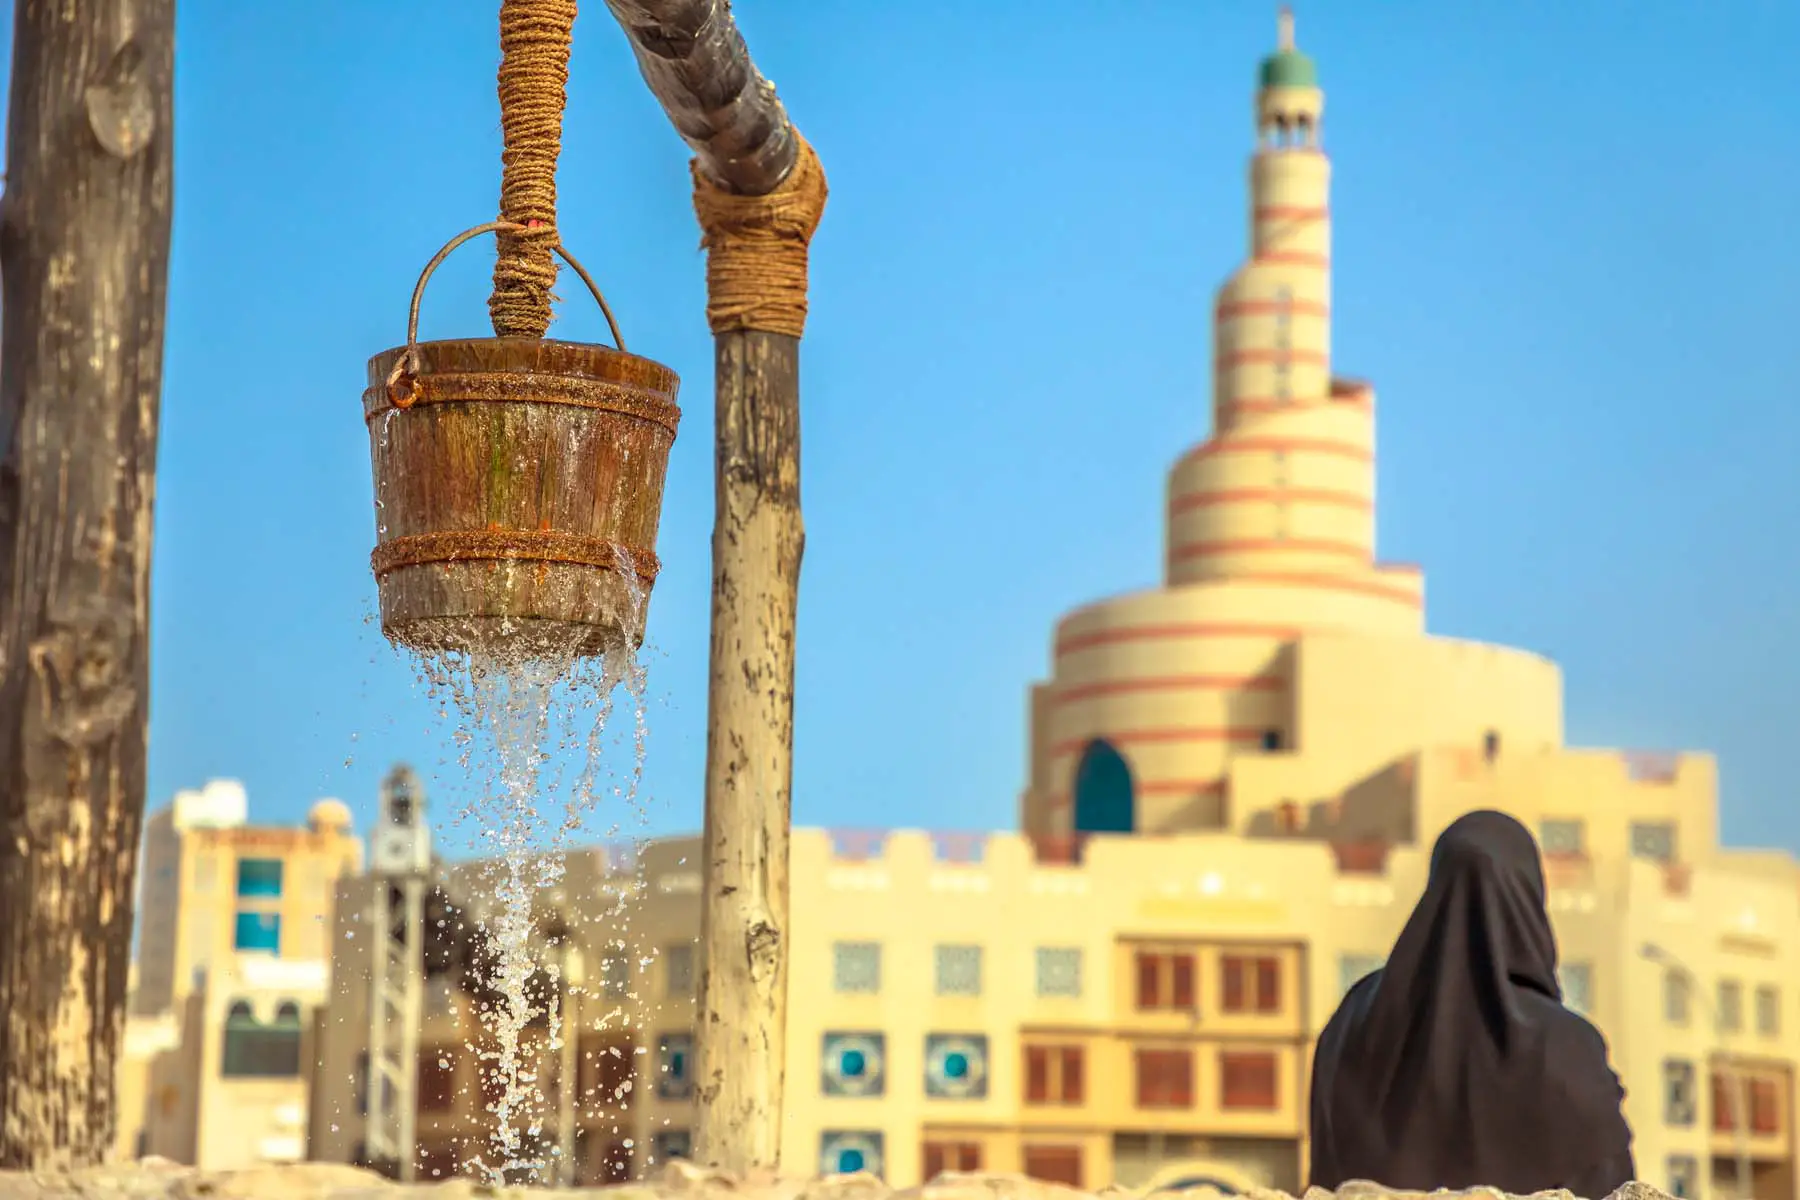 A bucket overflowing with water at a Qatari well